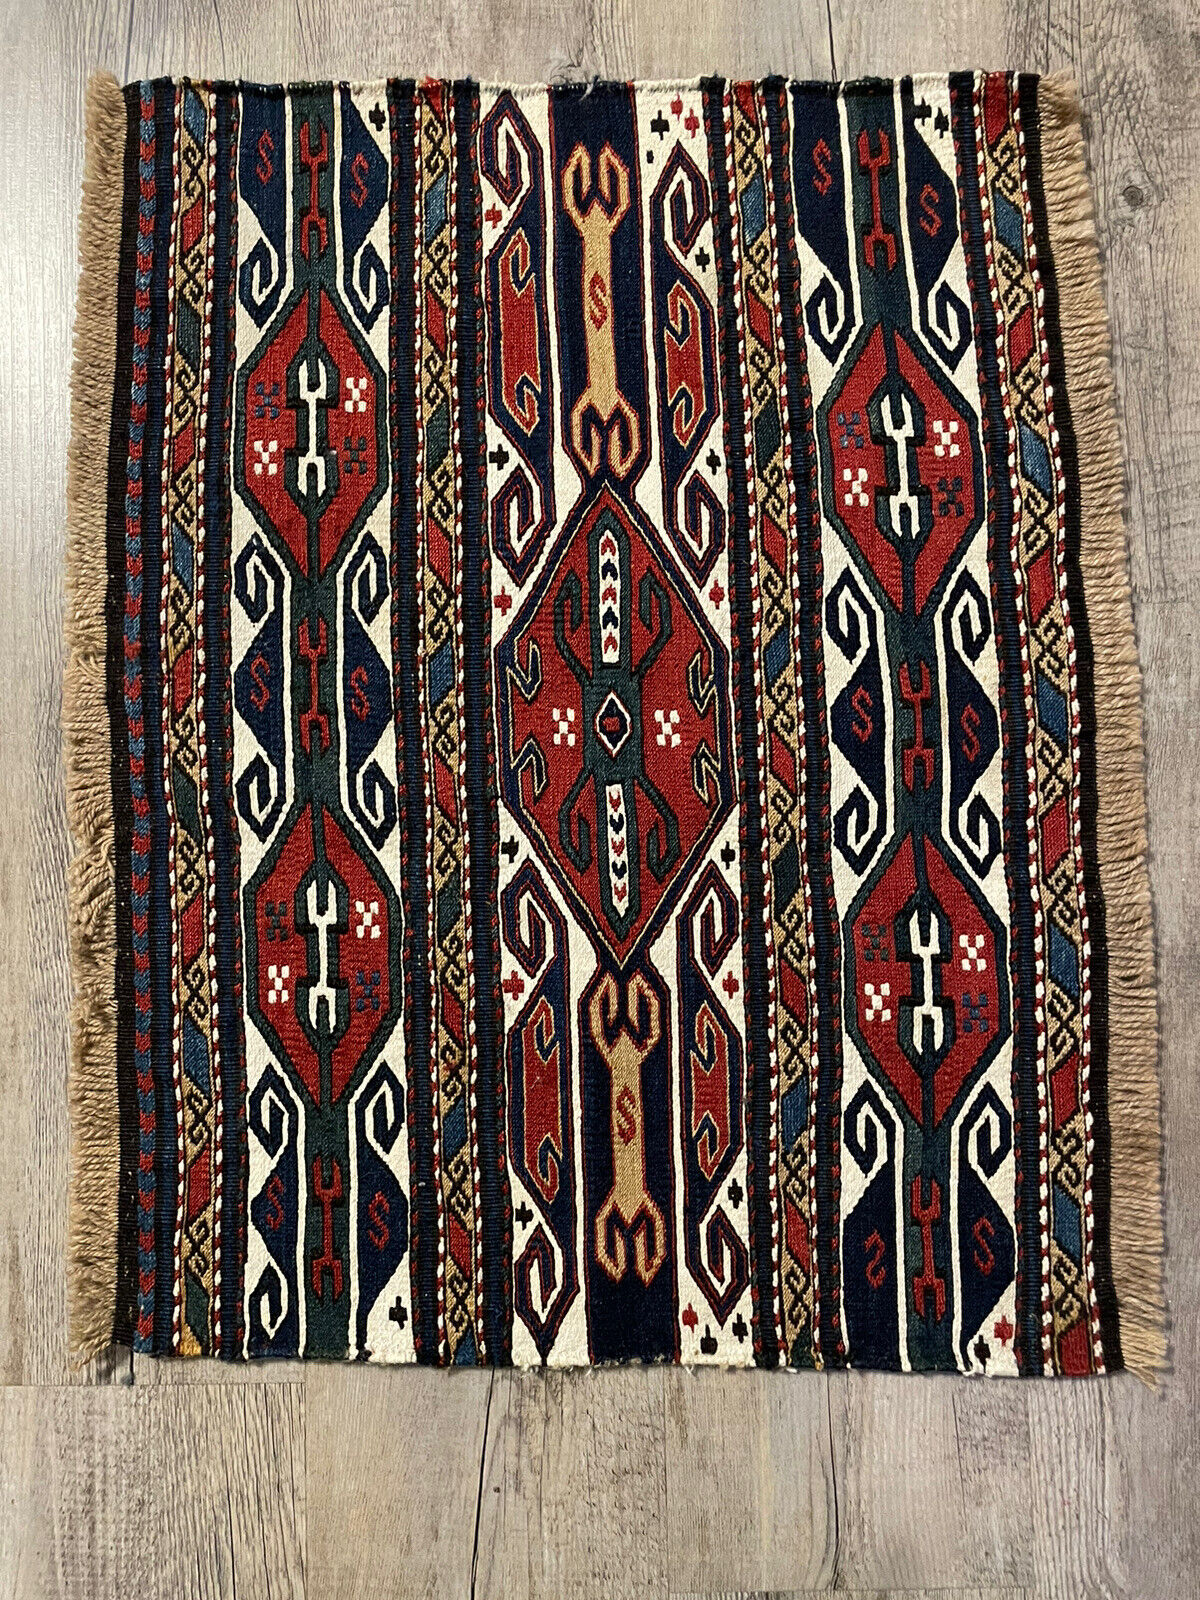 Close-up of elegance on Handmade Antique Persian Sumak Collectible Kilim - Detailed view highlighting the elegance and sophistication of the kilim's traditional Persian Sumak style.